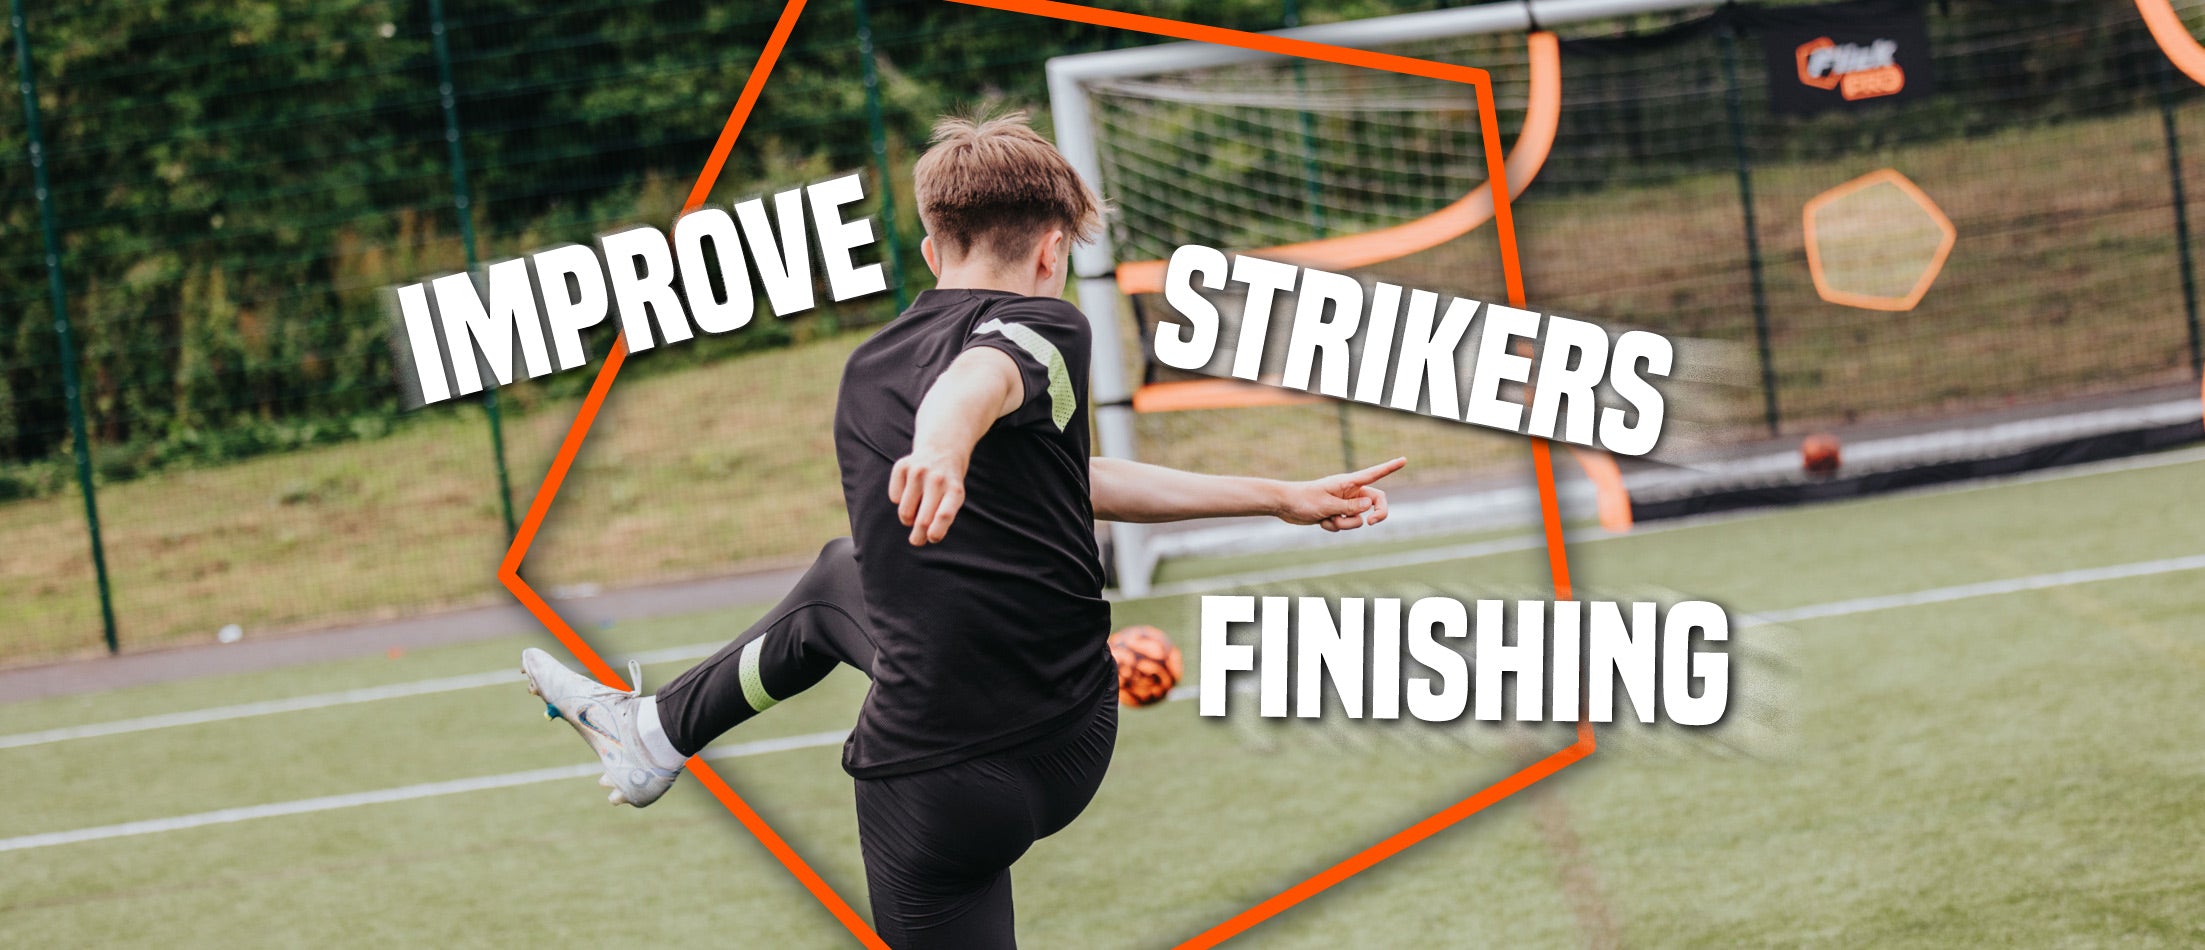 How to improve strikers finishing- PRO Target Sheet